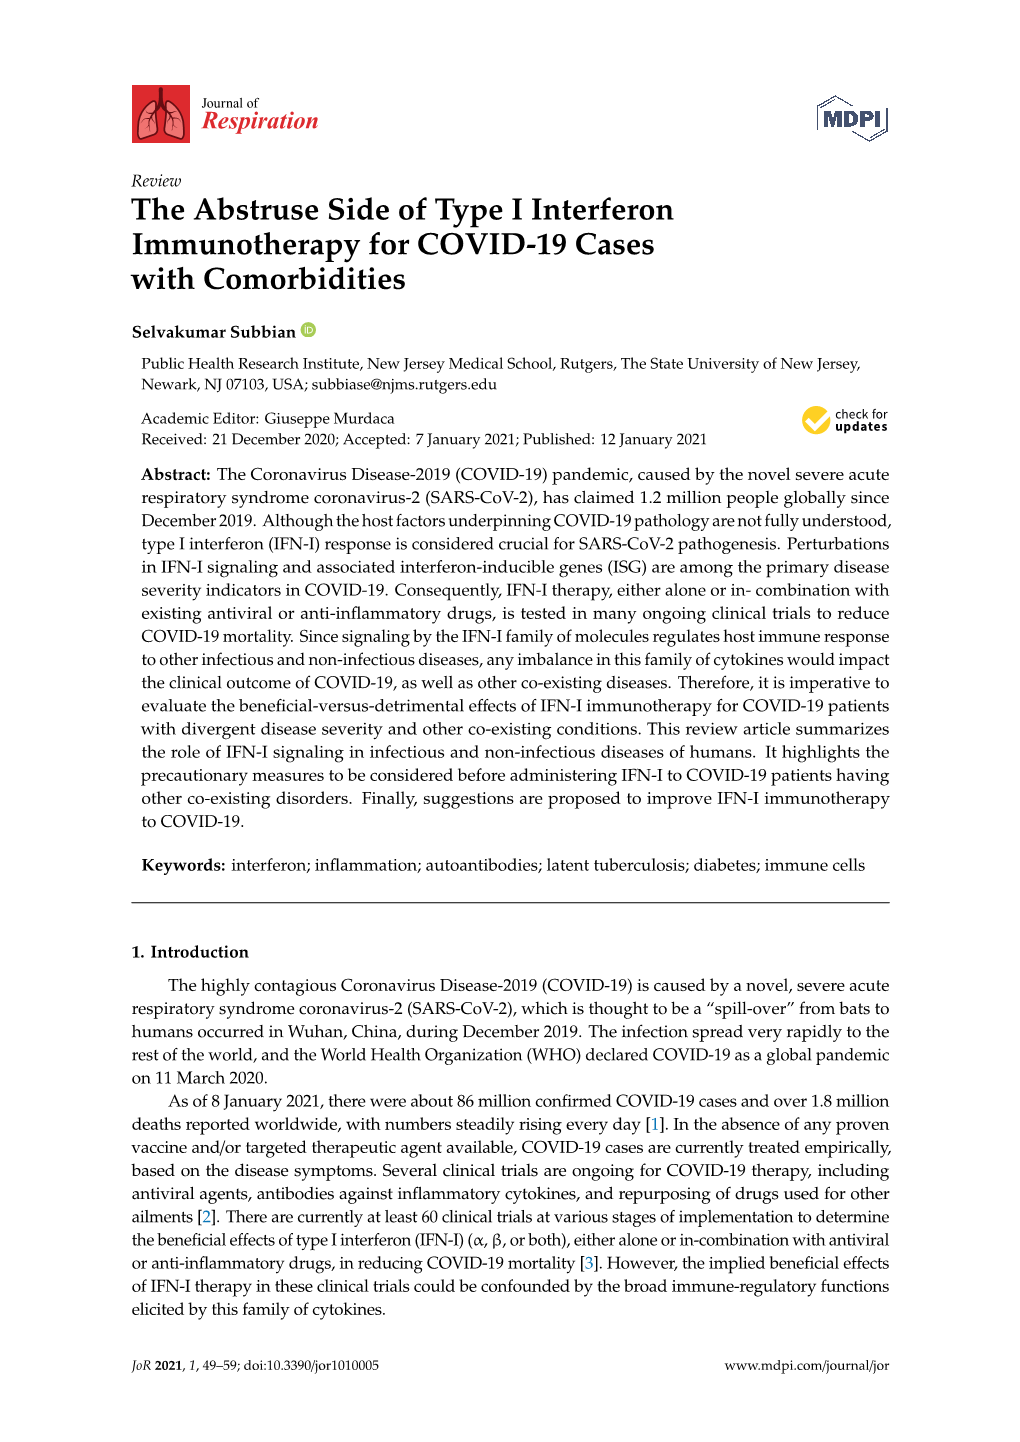 The Abstruse Side of Type I Interferon Immunotherapy for COVID-19 Cases with Comorbidities